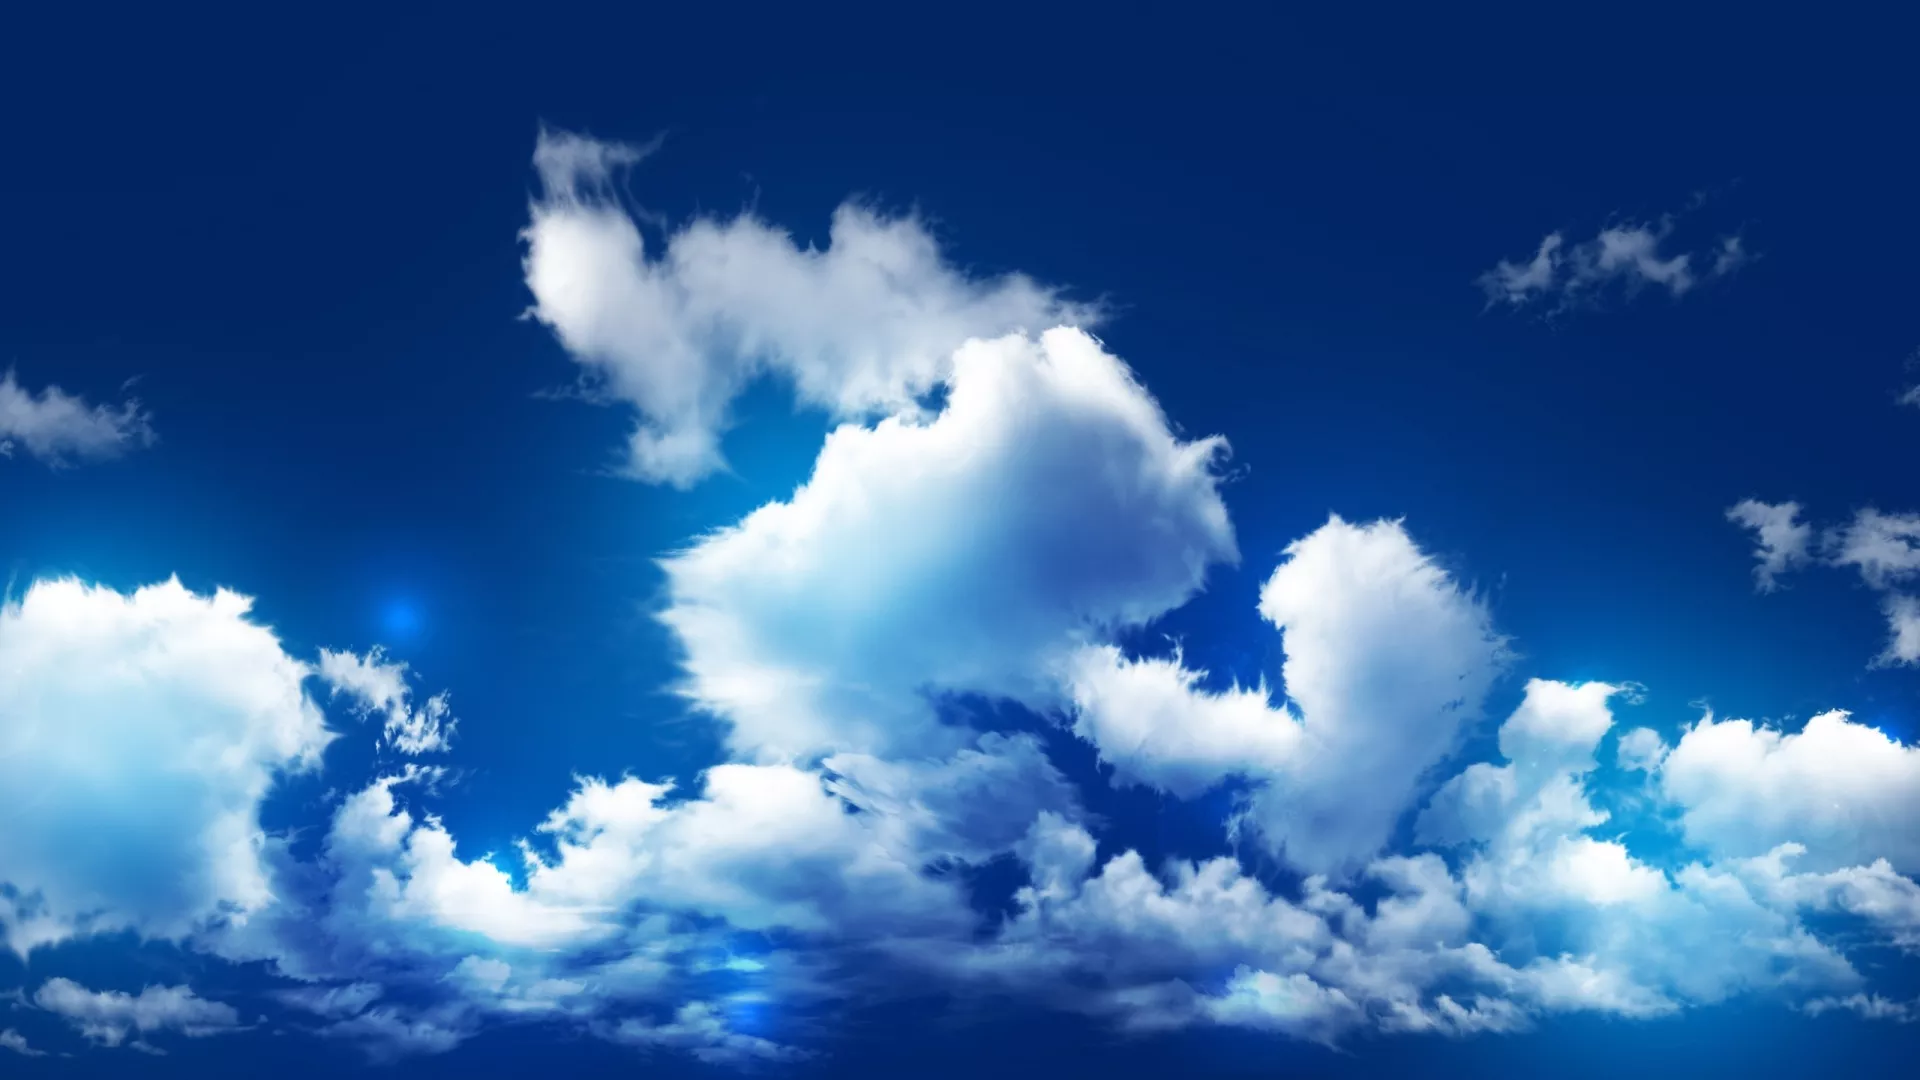 clouds desktop background pictures new hd wallpaper of clouds 1